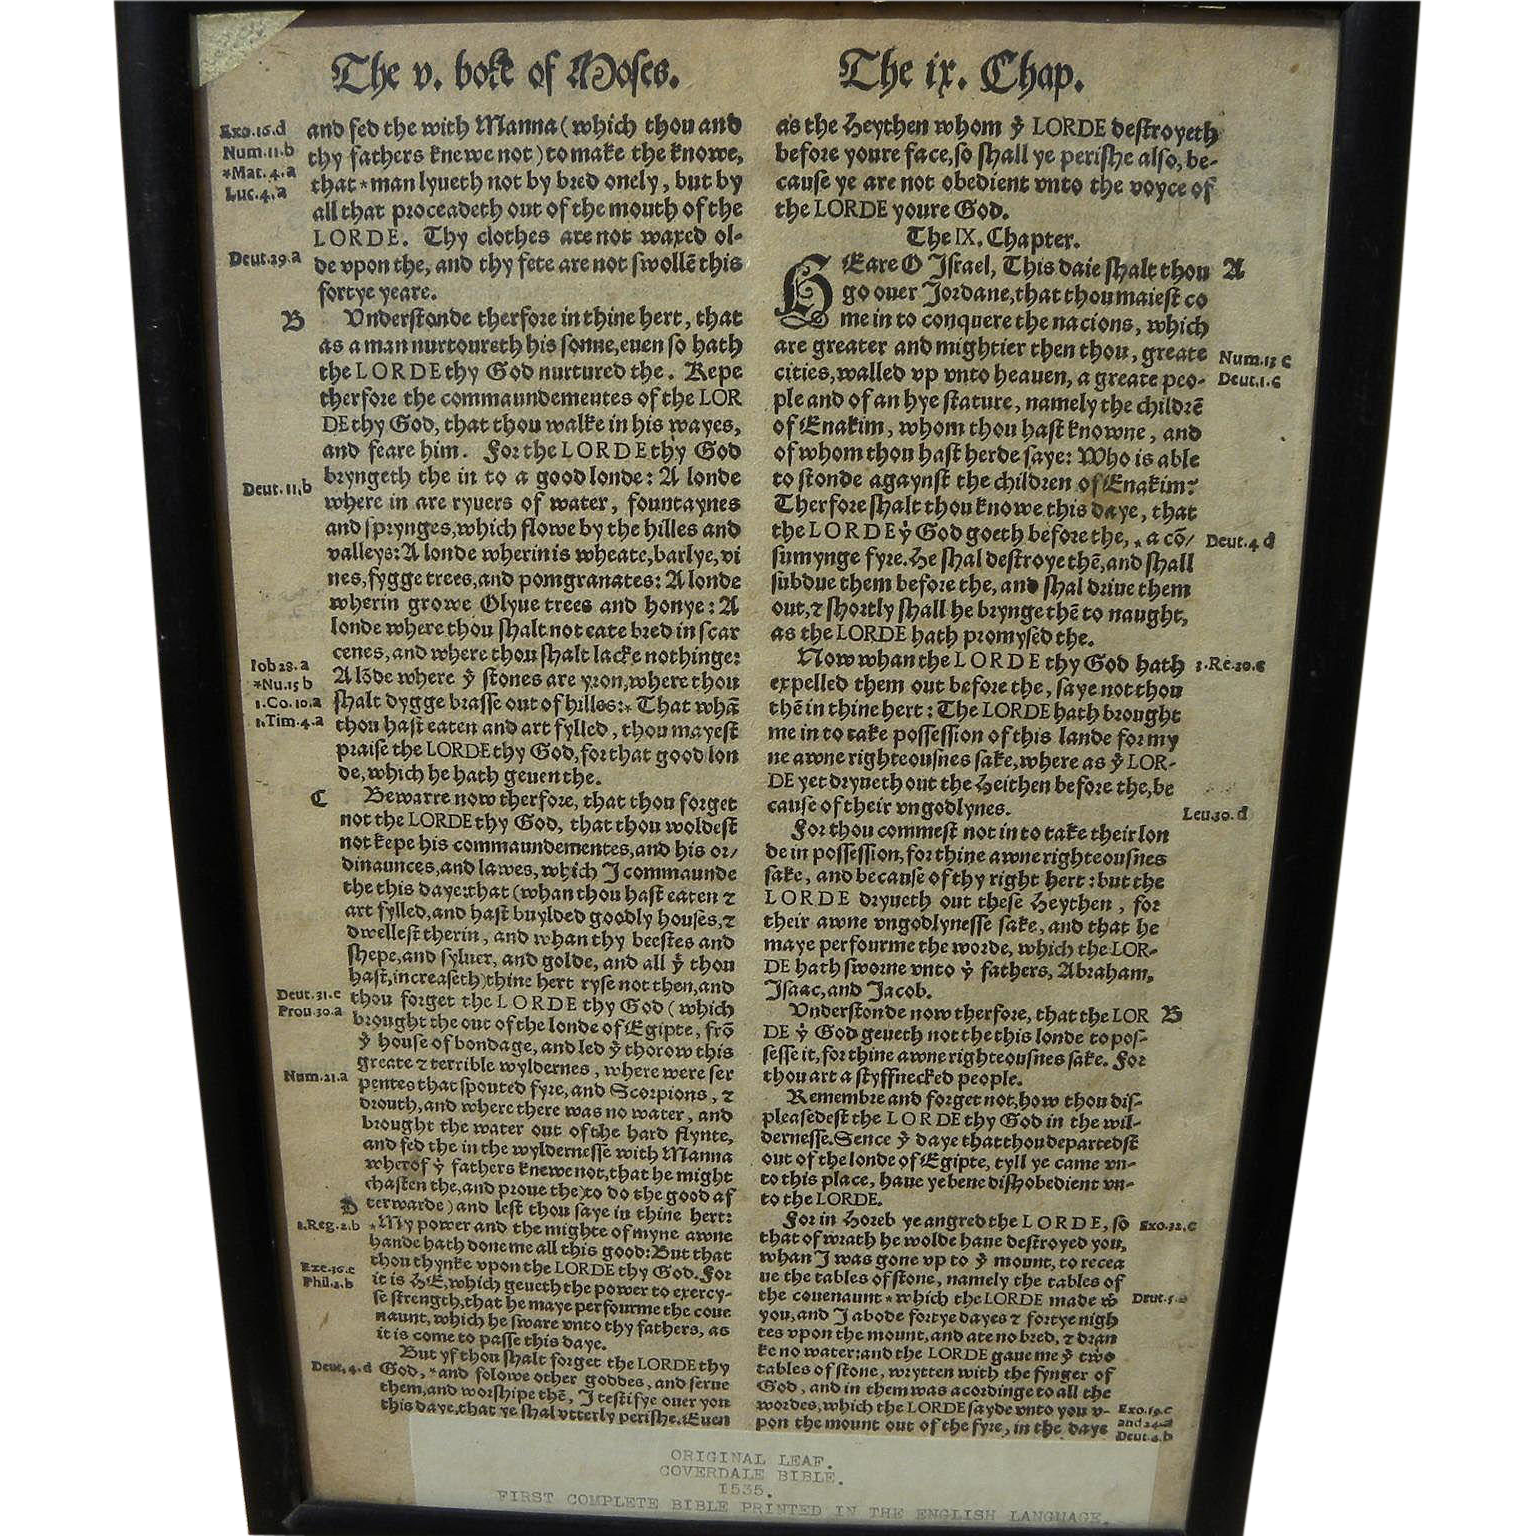 Rare original leaf from the Coverdale Bible